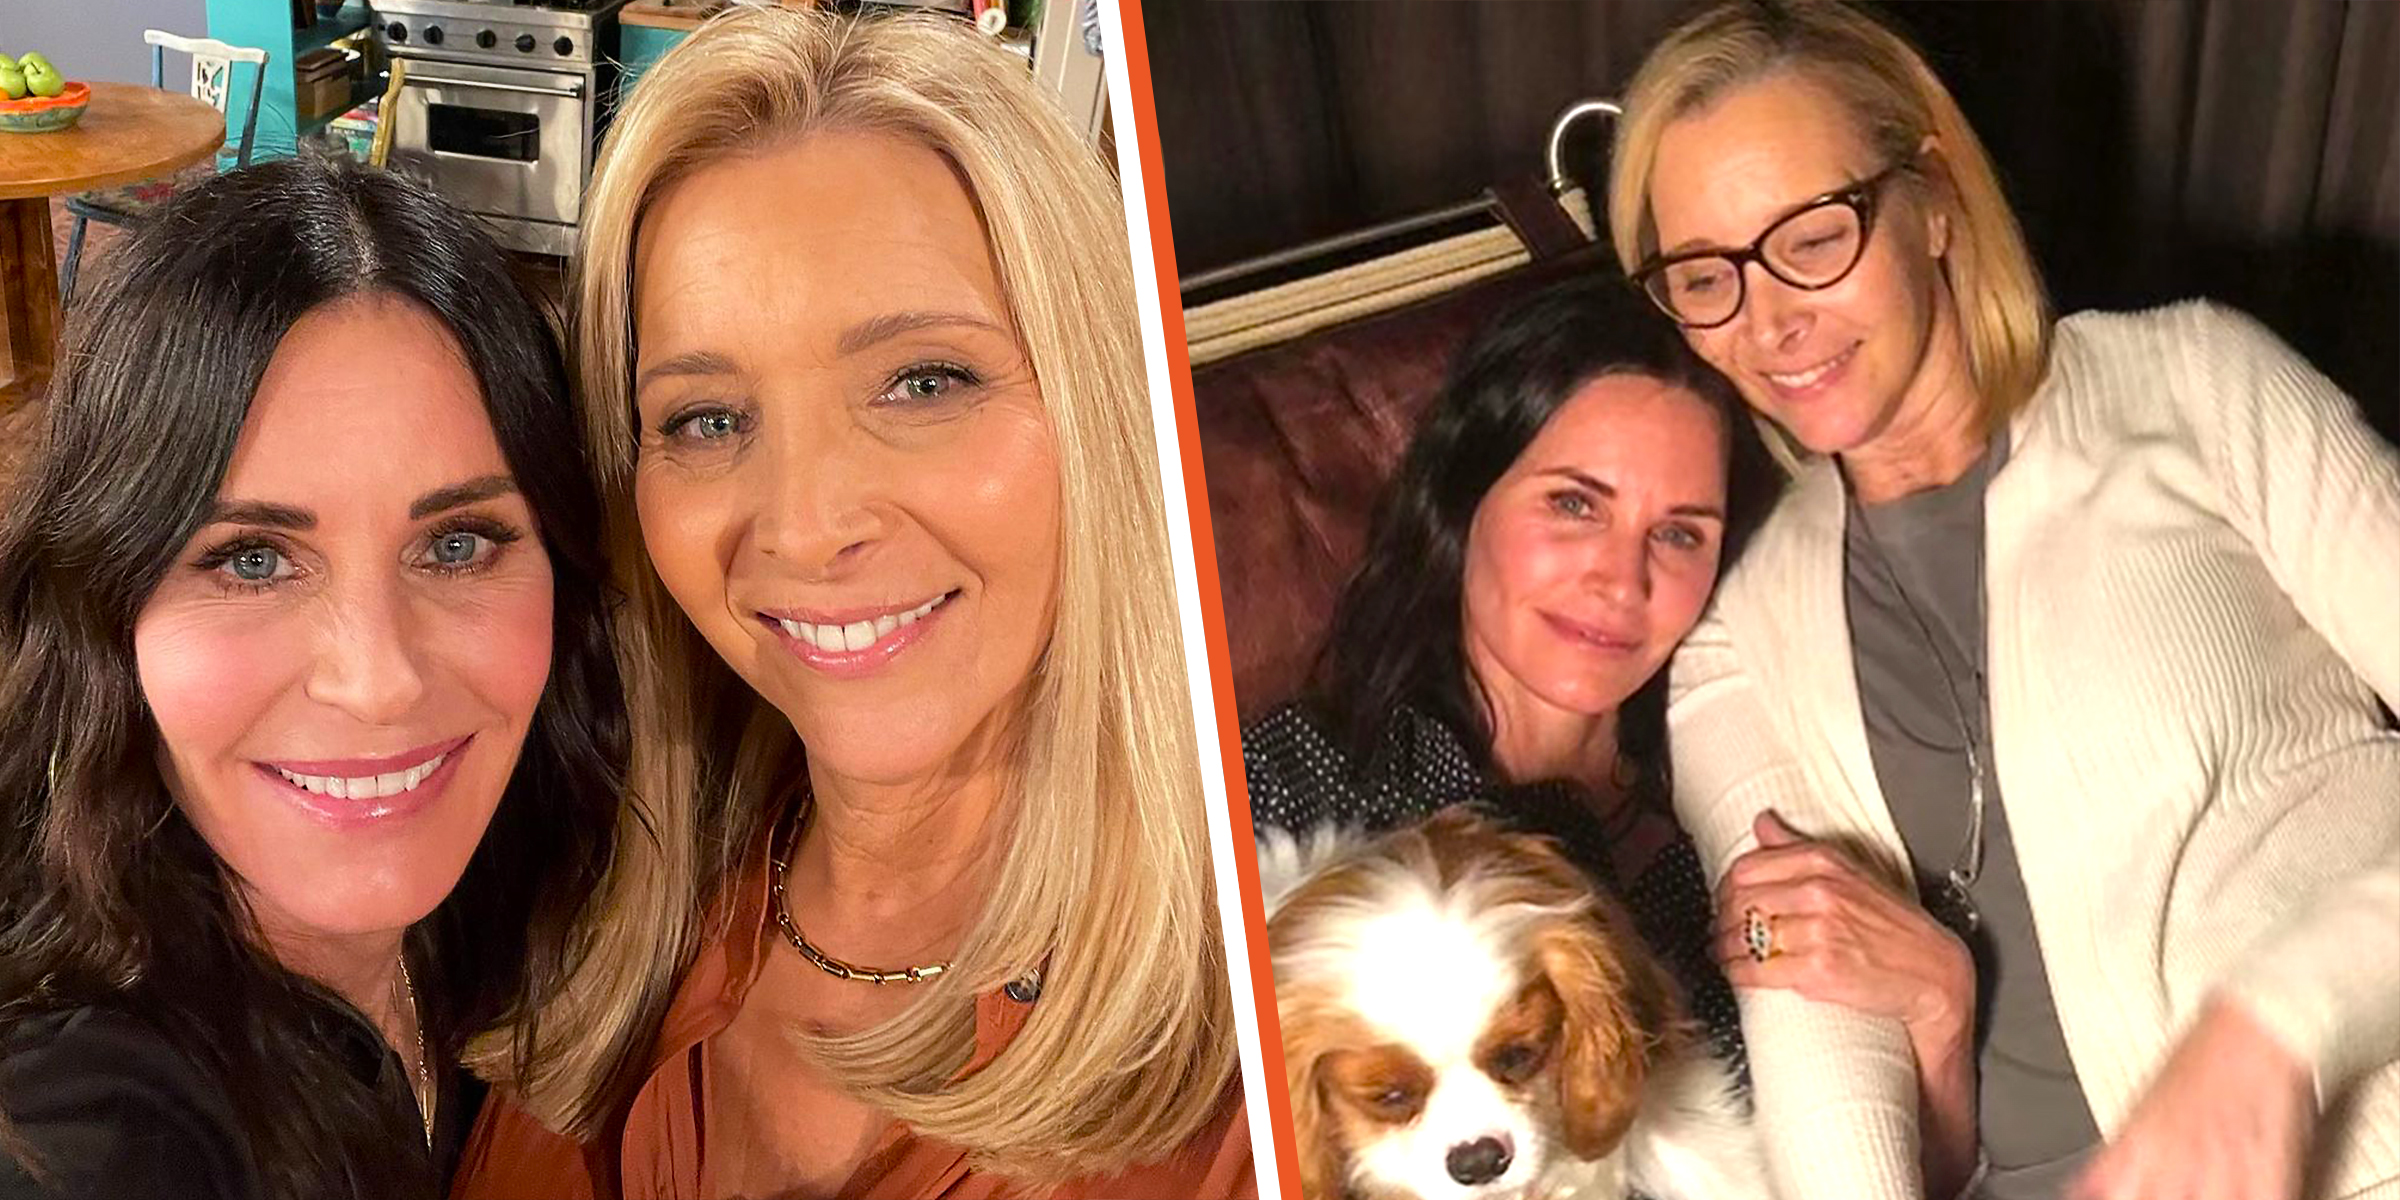 Courteney Cox and Lisa Kudrow | Source: Instagram/courteneycoxofficial